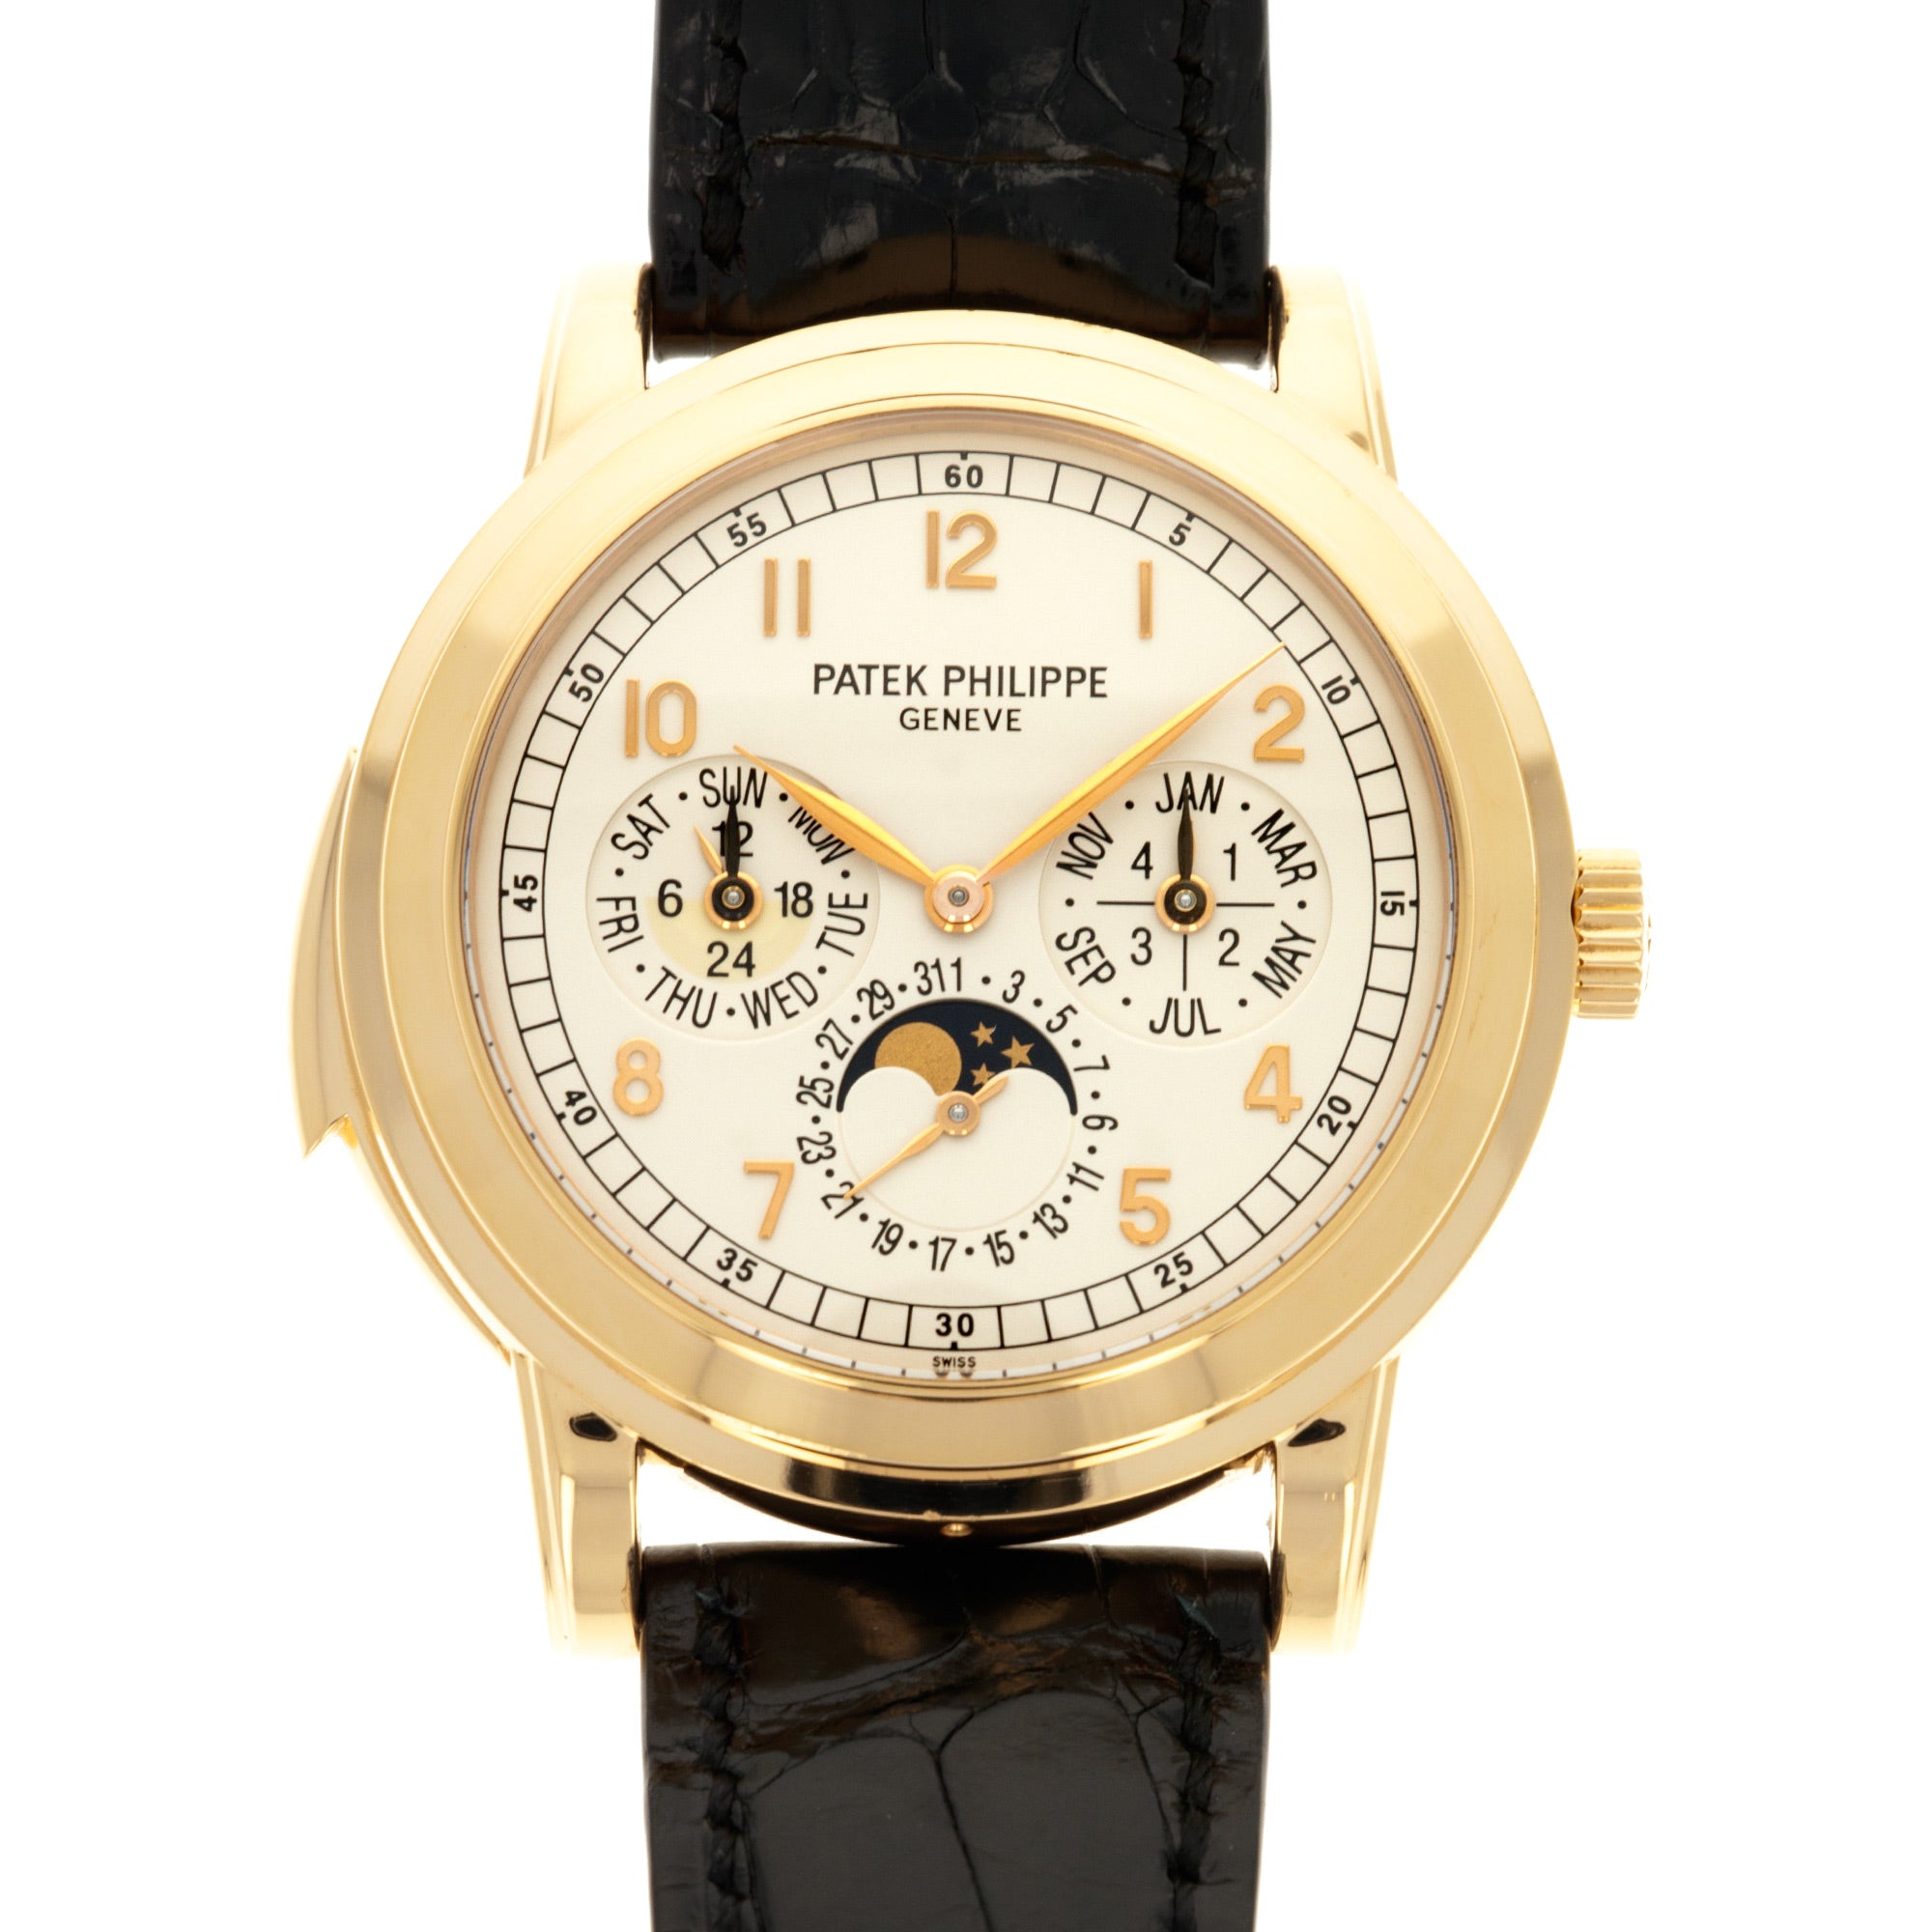 Patek Philippe - Patek Philippe Rose Gold Perpetual Minute Repeater Watch Ref. 5074, Double Sealed - The Keystone Watches